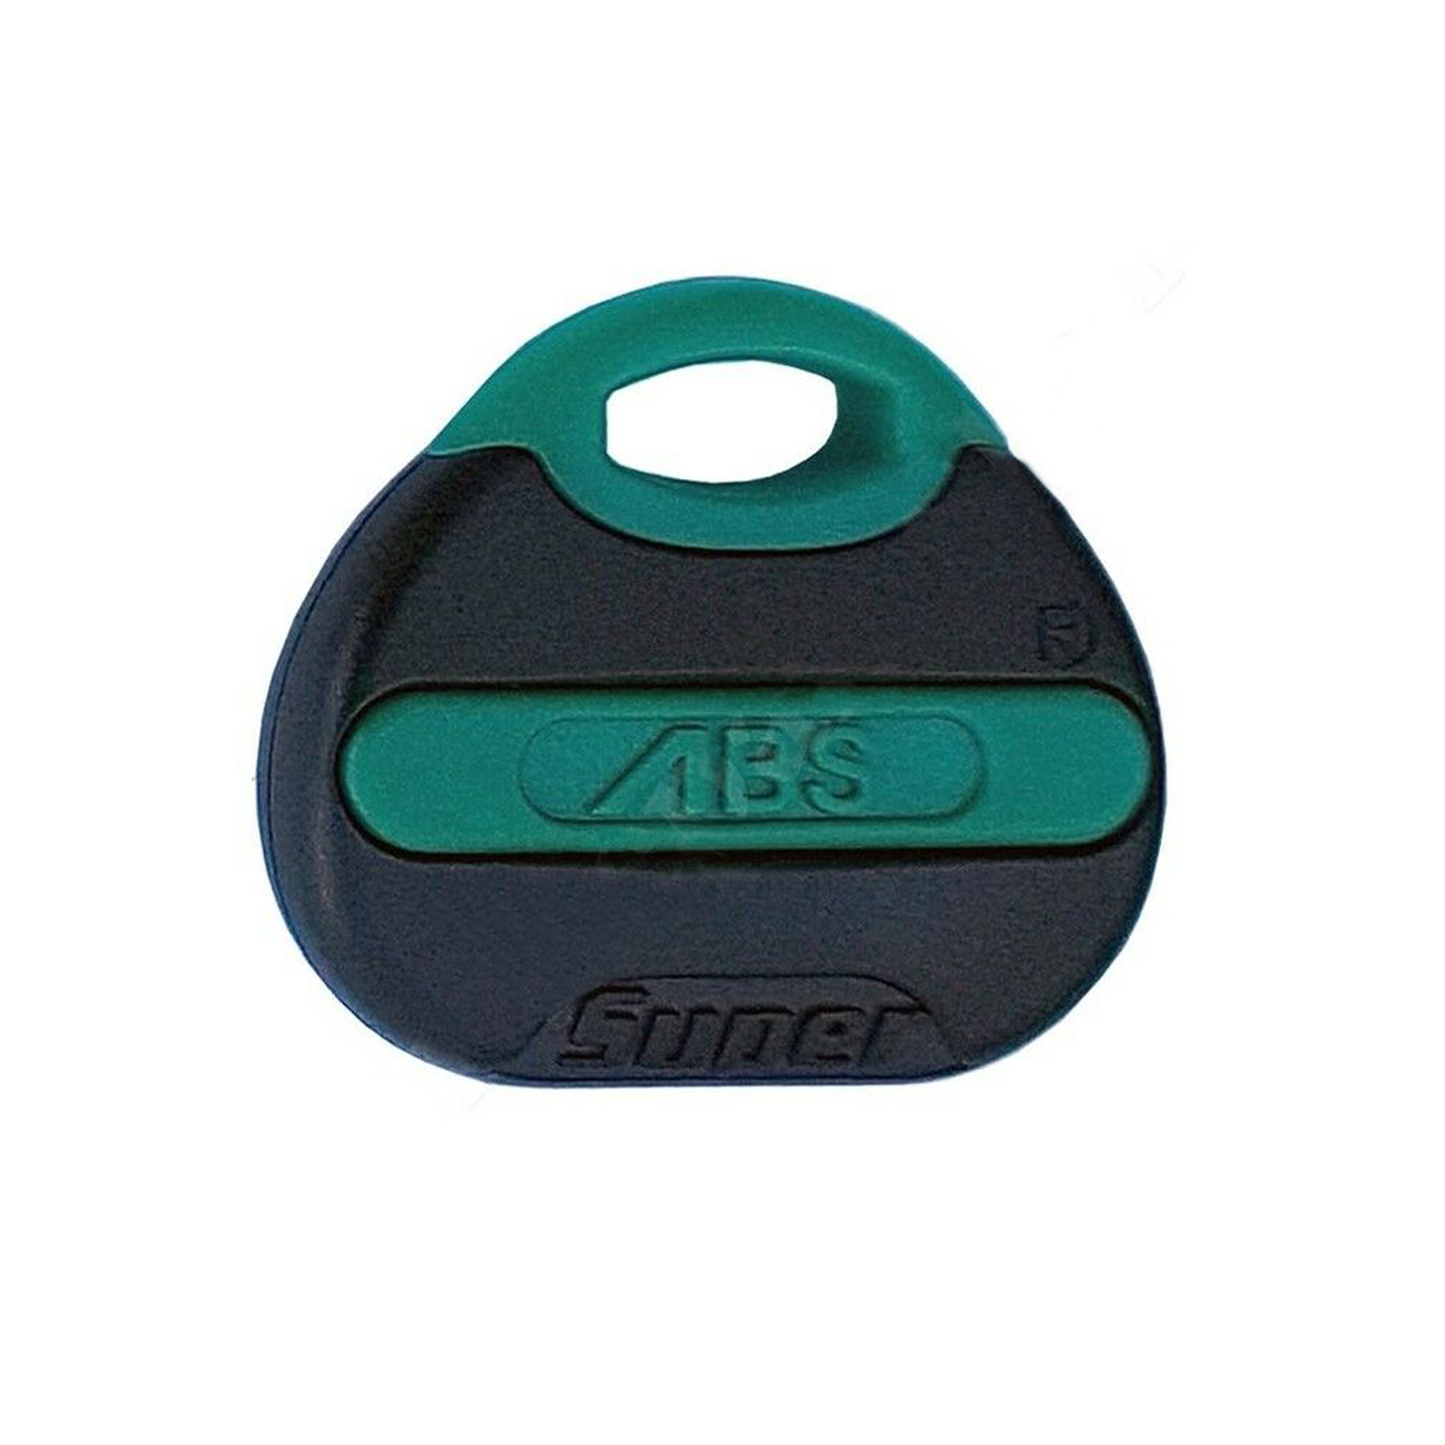 ABS Key Fob Coloured Upgrade Avocet Euro Cylinder Red Blue Green Yellow Inserts